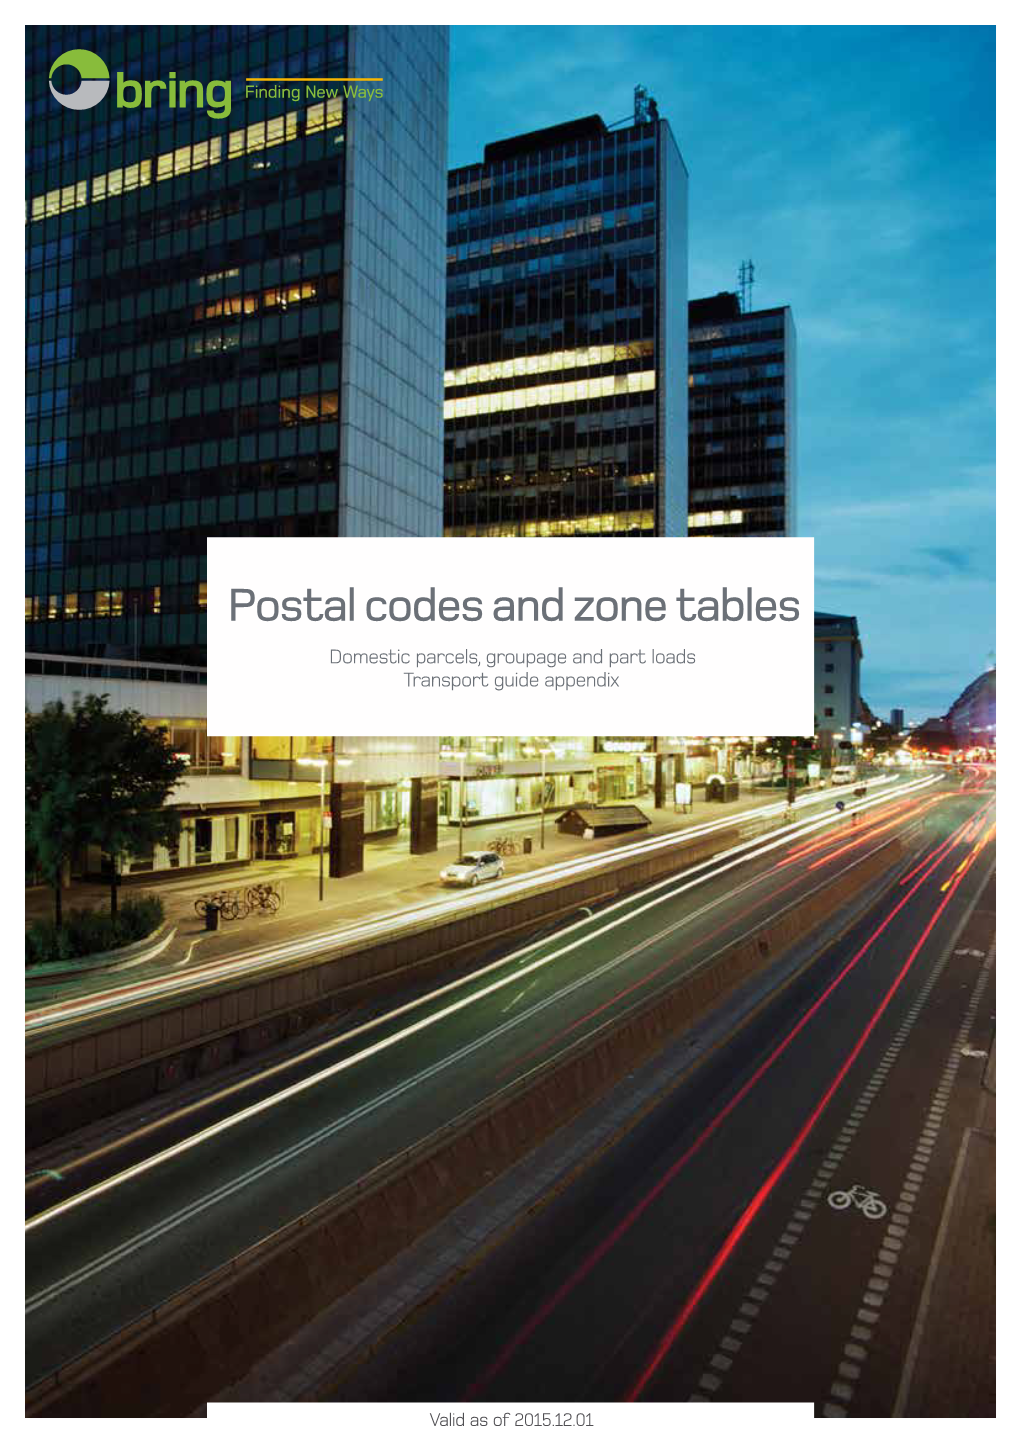 Postal Codes and Zone Tables Parcels, Groupage and Part Load 01122015